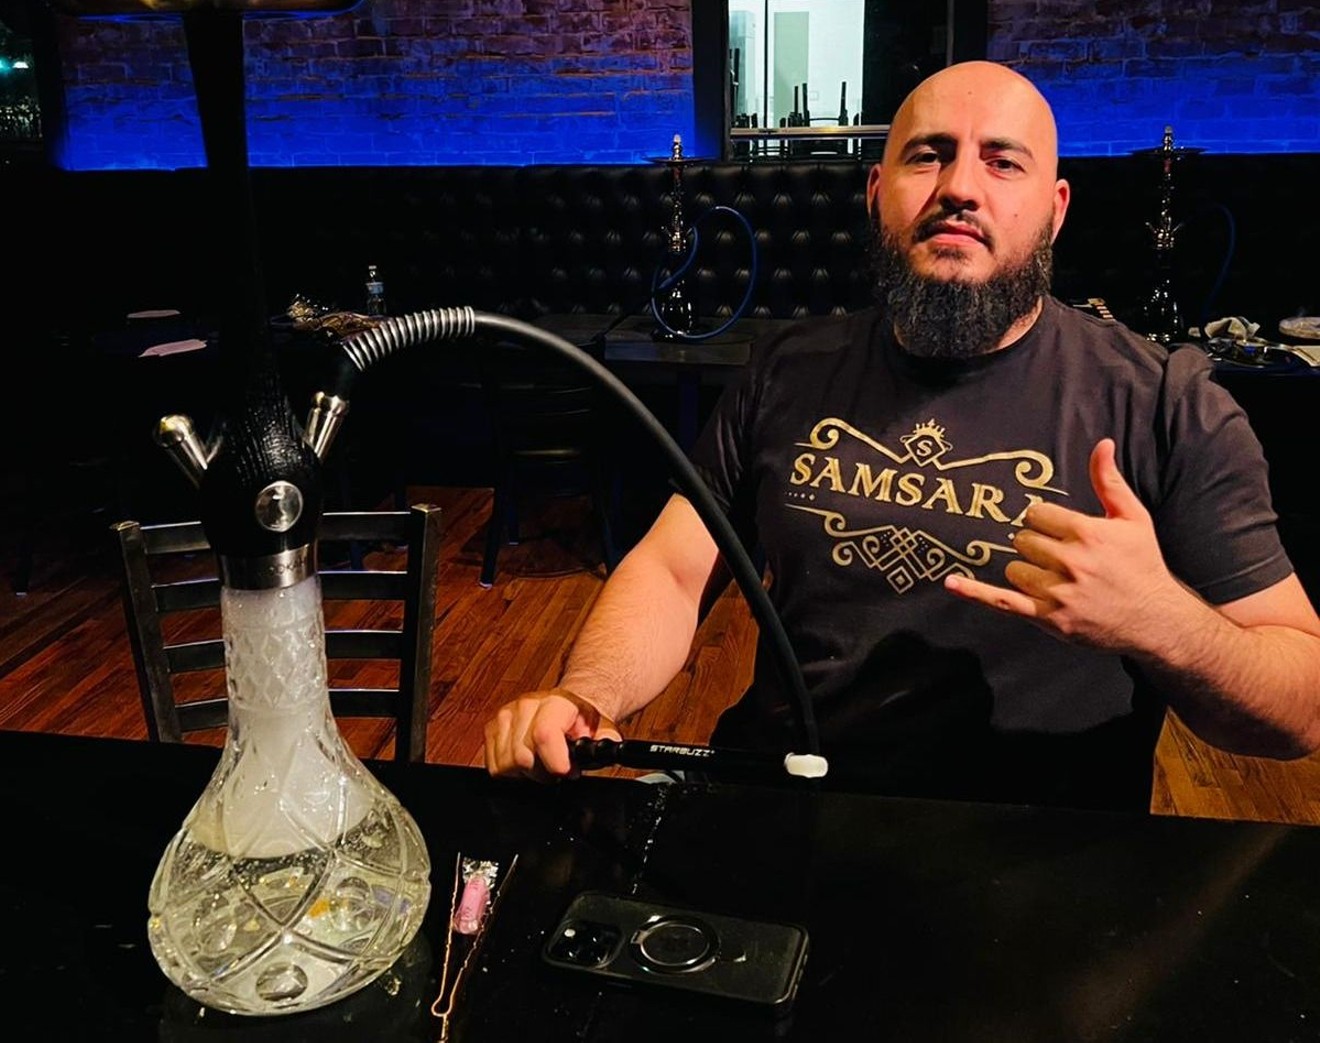 Owner Ali Yousafzai hopes to make Samsara stand out from other hookah lounges with its halal menu and full bar.